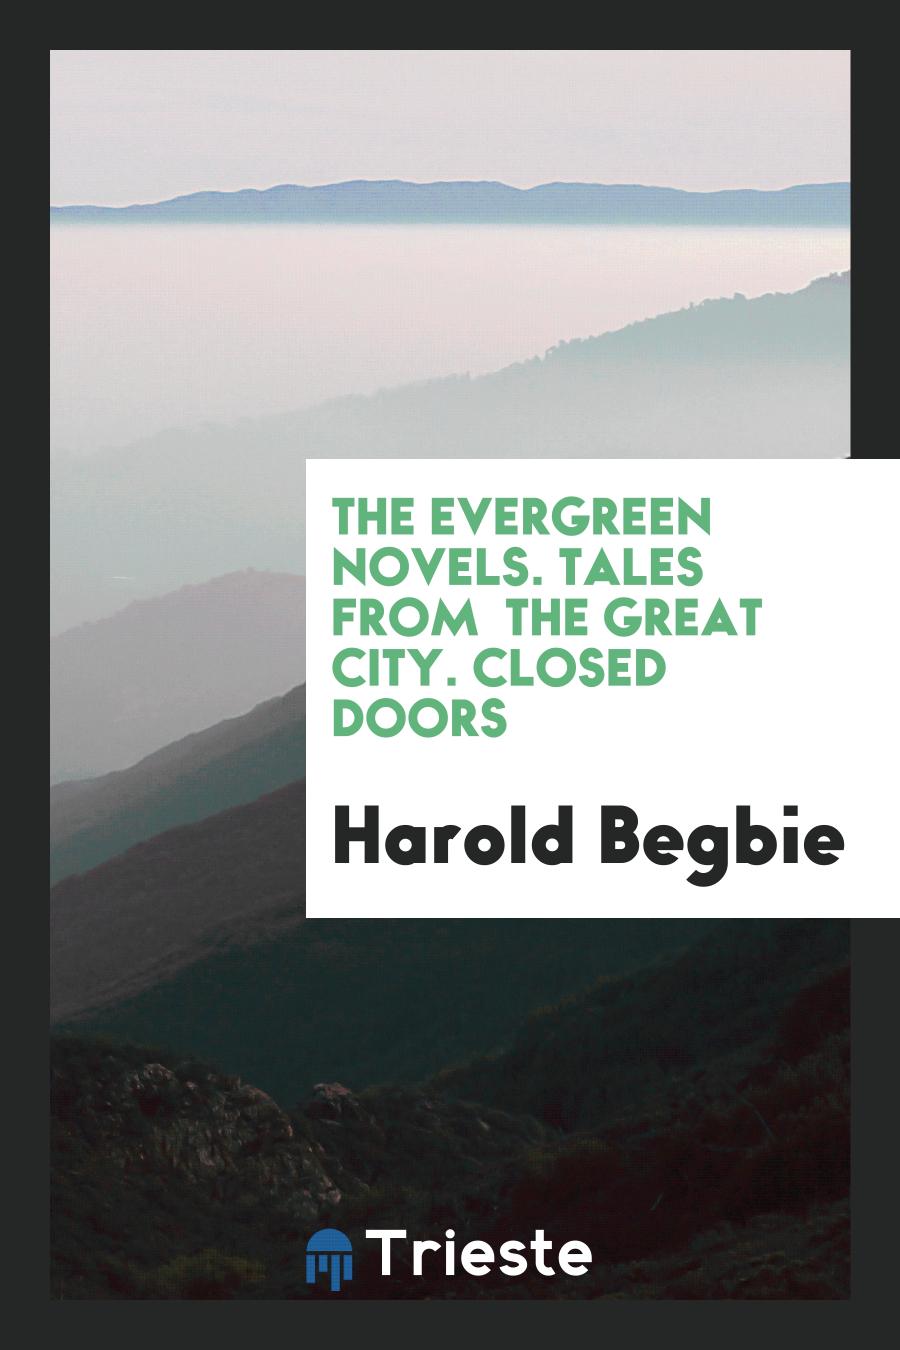 The Evergreen Novels. Tales from the Great City. Closed Doors